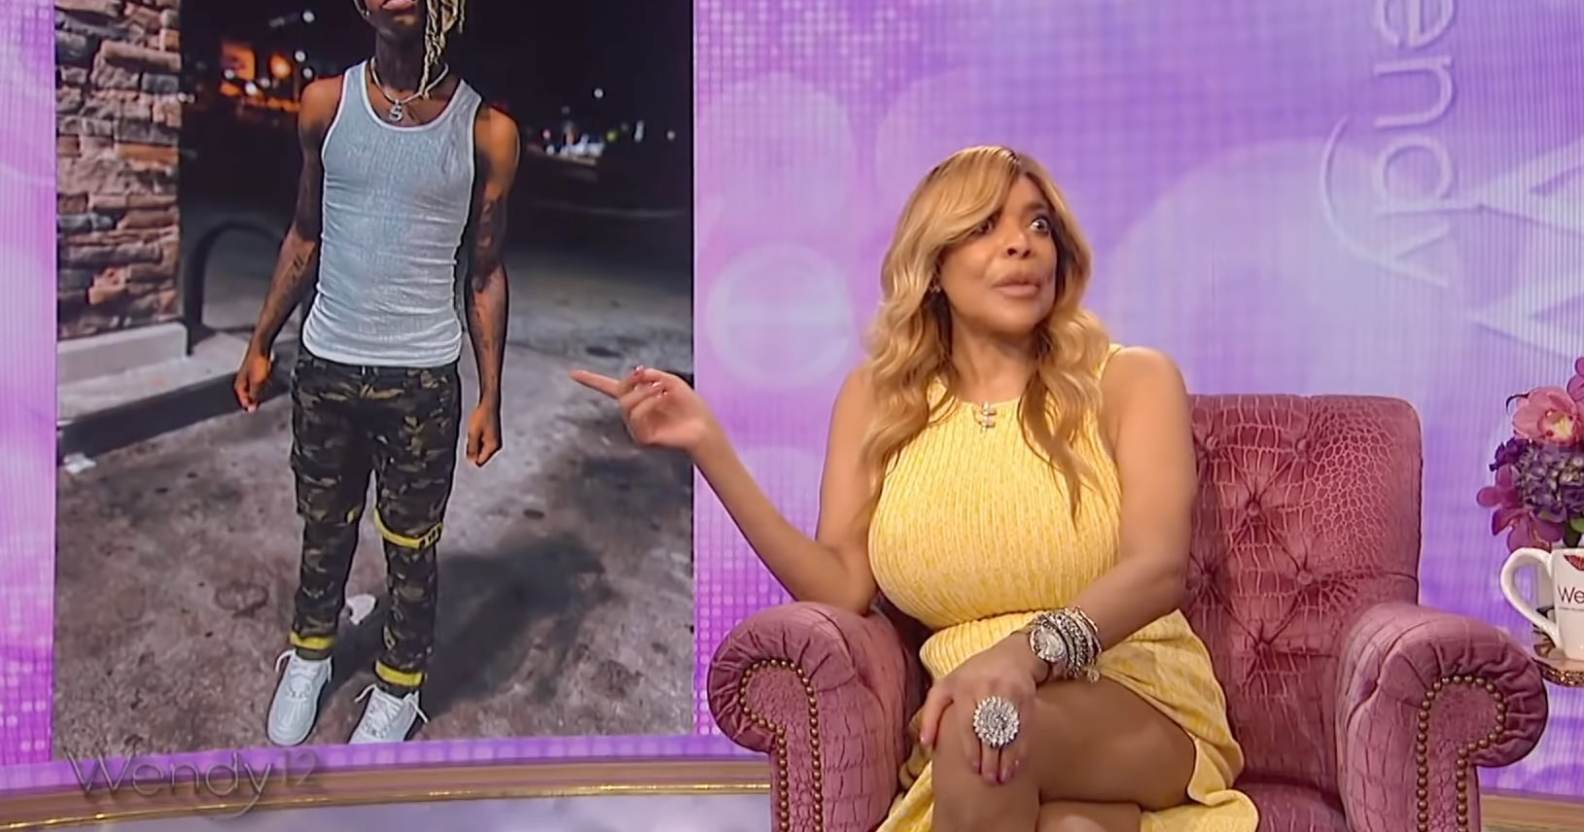 Kali Rose Fuck Porn Latest Download - Wendy Williams faces blistering backlash over 'disgusting' coverage of  TikTok star's murder | PinkNews | Latest lesbian, gay, bi and trans news |  LGBTQ+ news